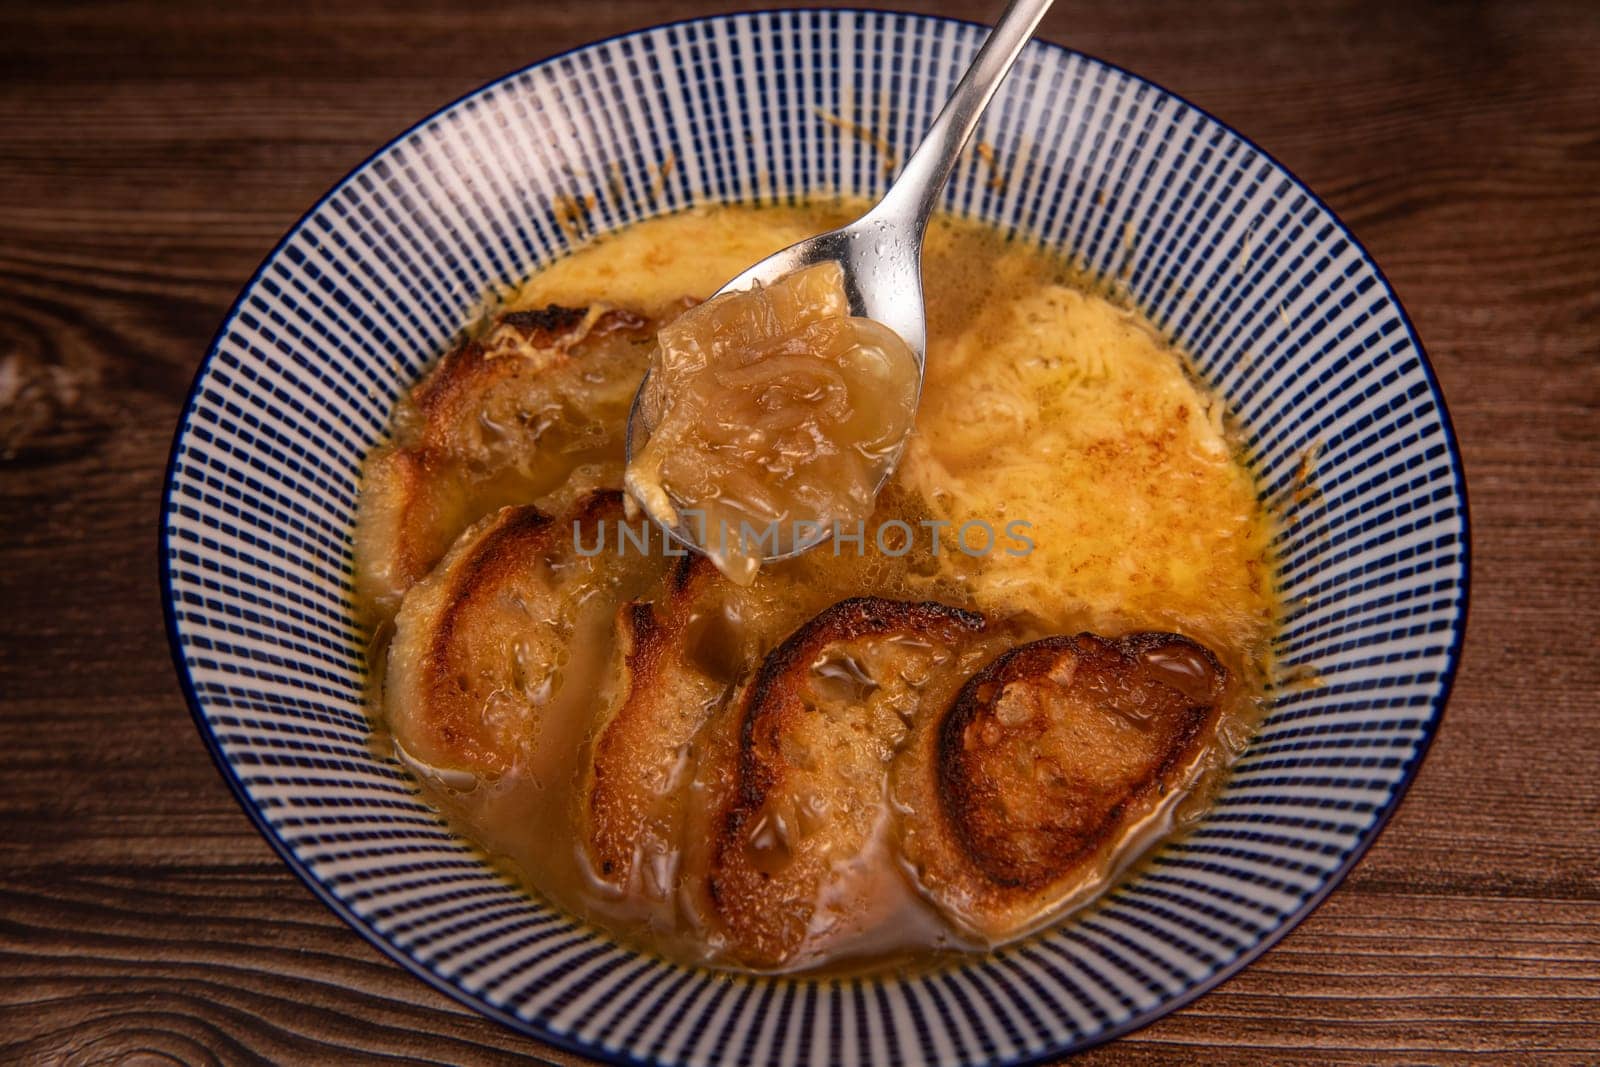 Classic French onion soup baked with cheese croutons sprinkled with fresh thyme, close up view. by FreeProd